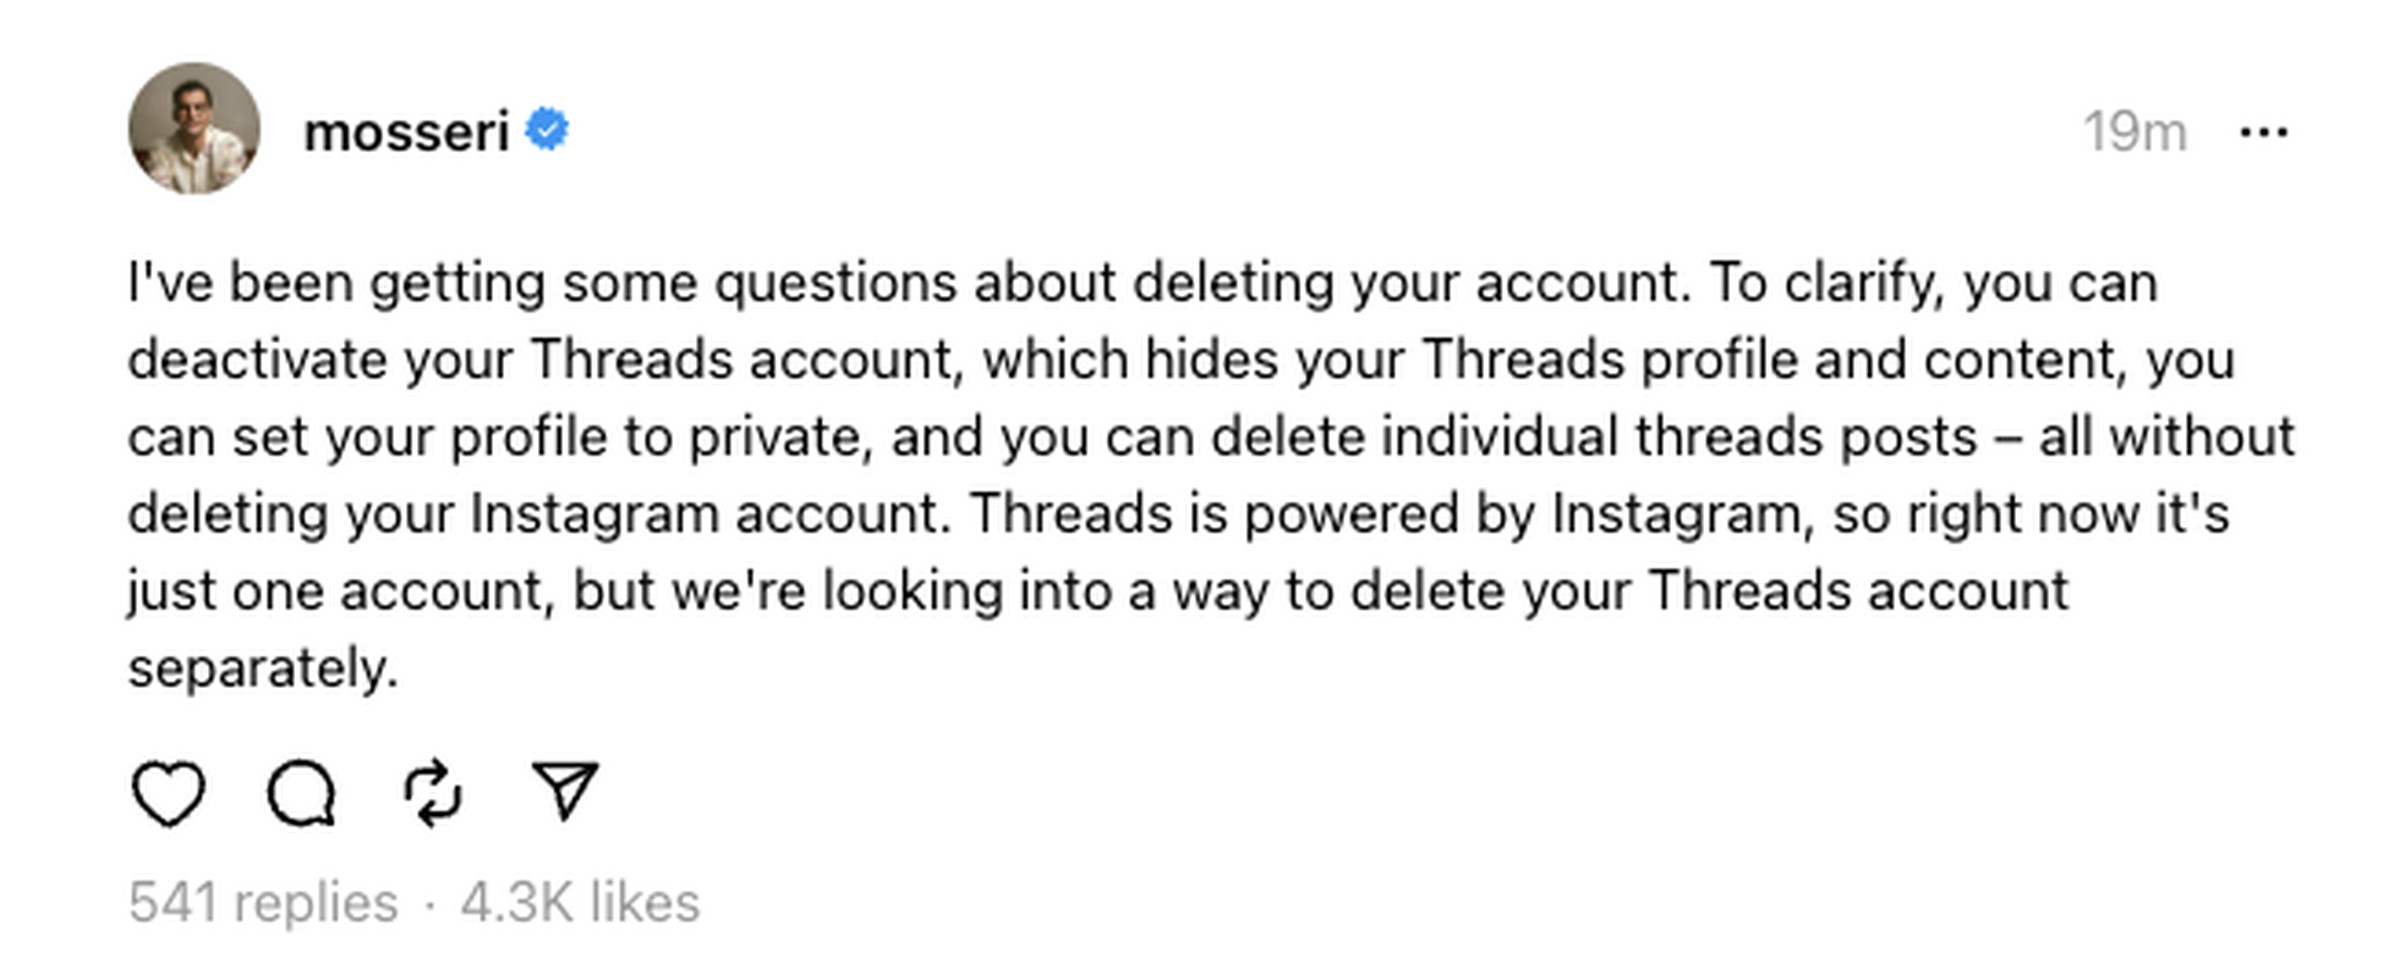 A screenshot of Adam Mosseri’s post about deleting Threads accounts. “I’ve been getting some questions about deleting your account. To clarify, you can deactivate your Threads account, which hides your Threads profile and content, you can set your profile to private, and you can delete individual threads posts – all without deleting your Instagram account. Threads is powered by Instagram, so right now it’s just one account, but we’re looking into a way to delete your Threads account separately.”